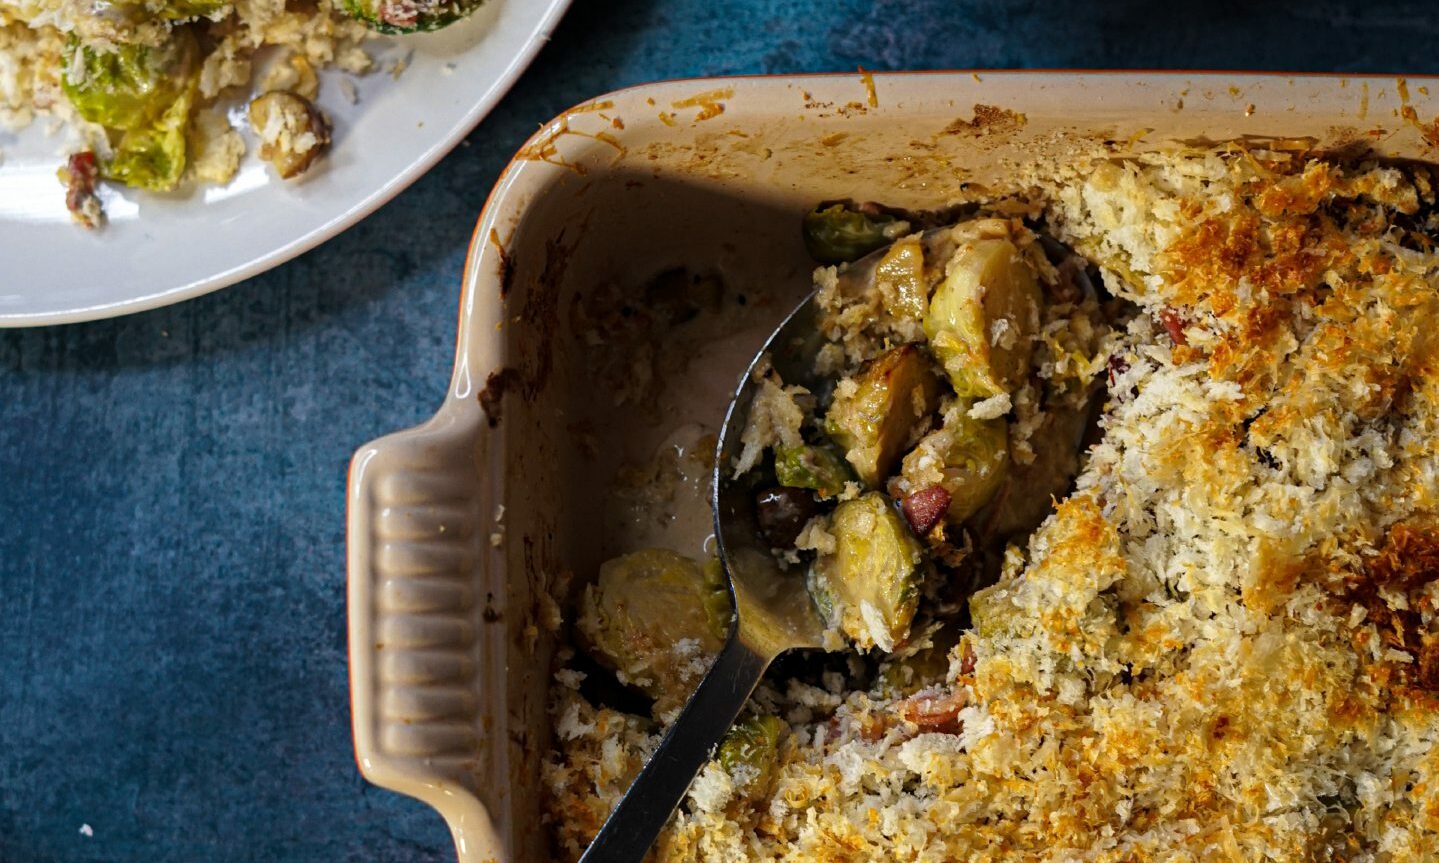 Midweek meal: Do Christmas right with this Brussels sprouts gratin